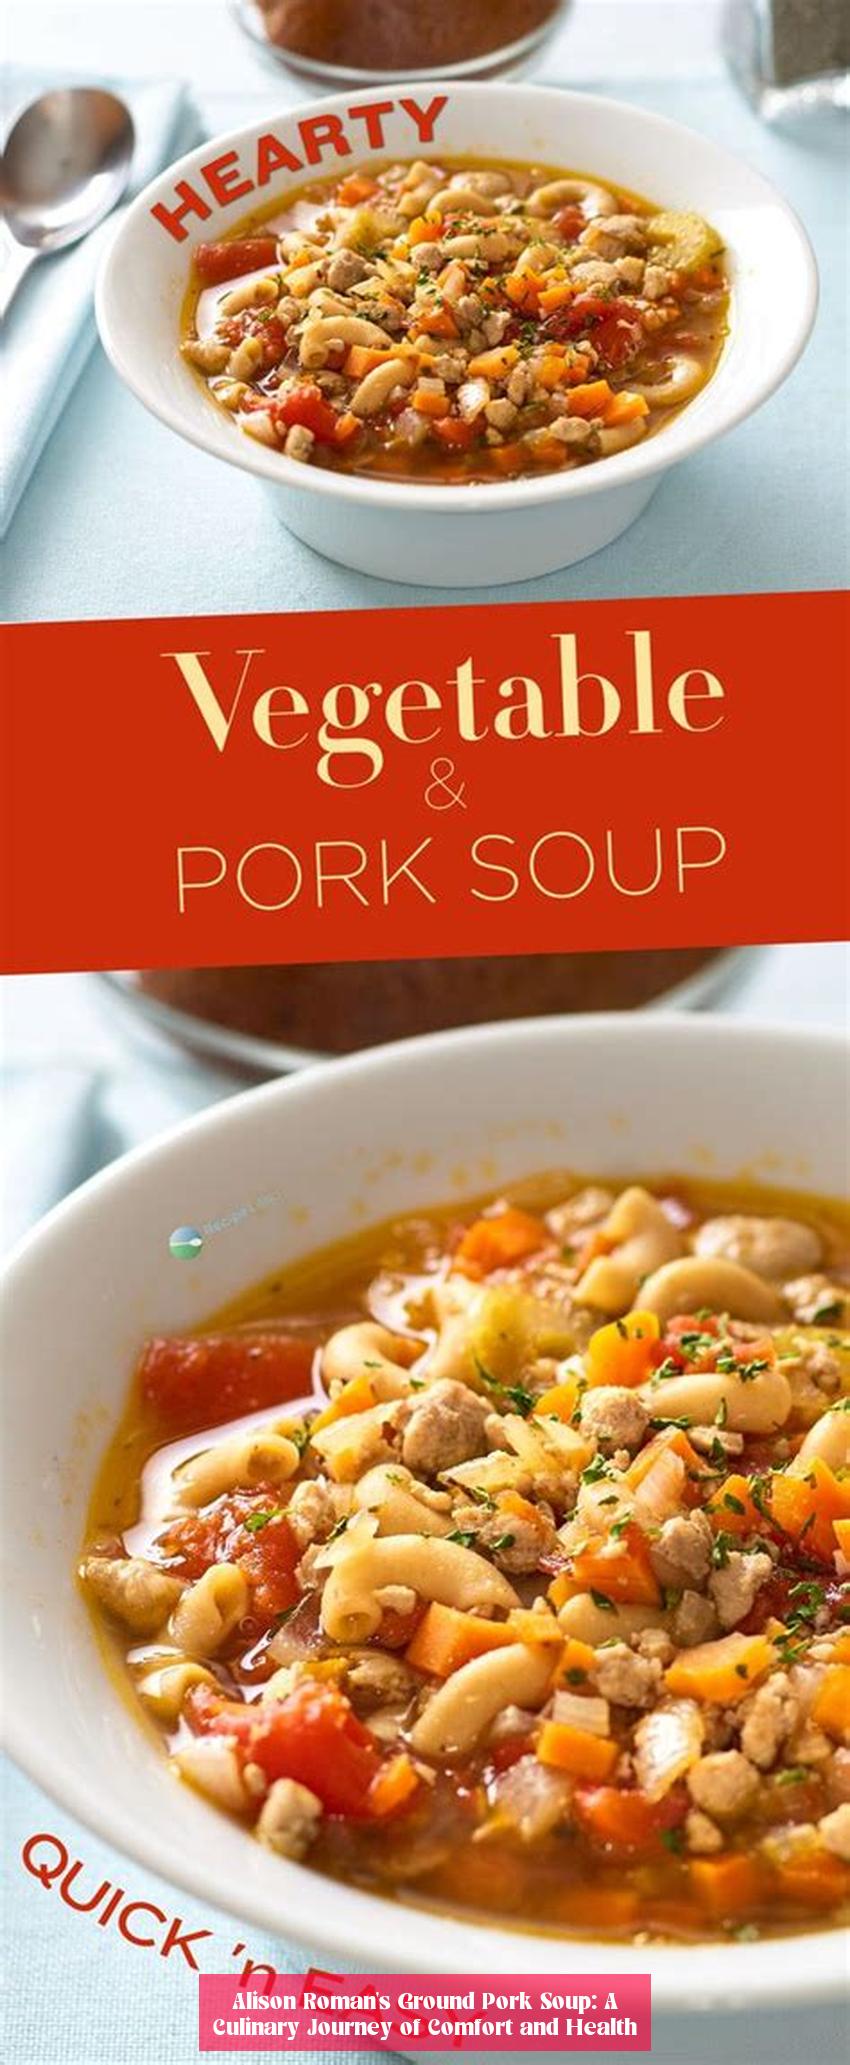 Alison Roman's Ground Pork Soup: A Culinary Journey of Comfort and Health